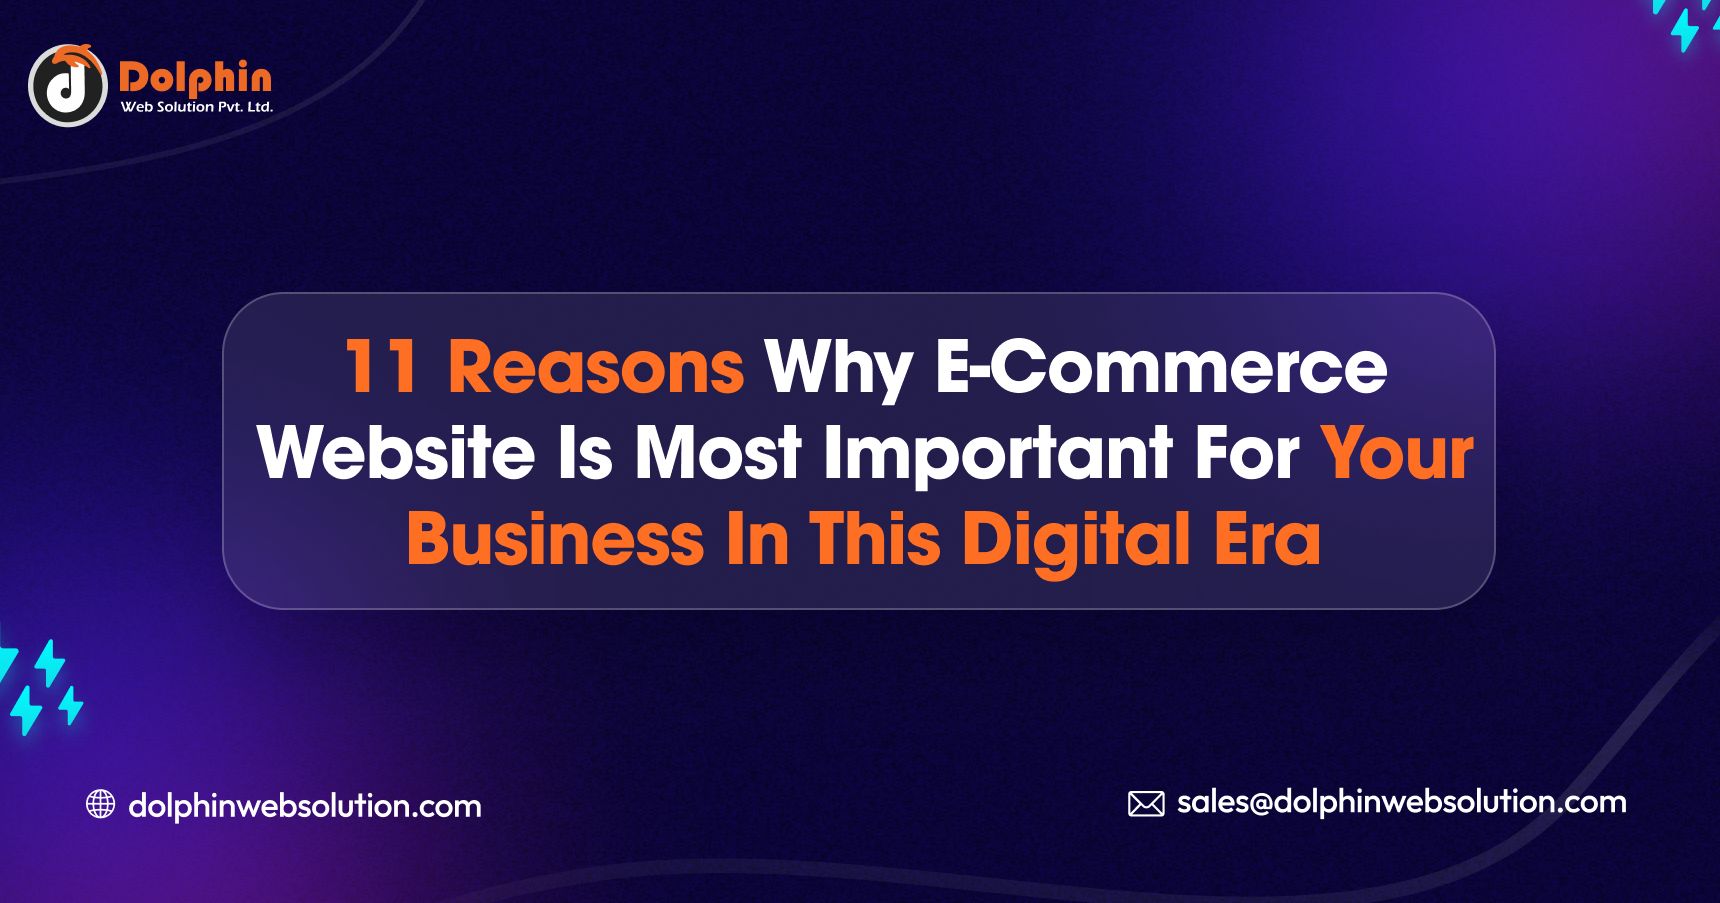 11 Reasons Why E-commerce Website is Most Important for Your Business in this Digital Era